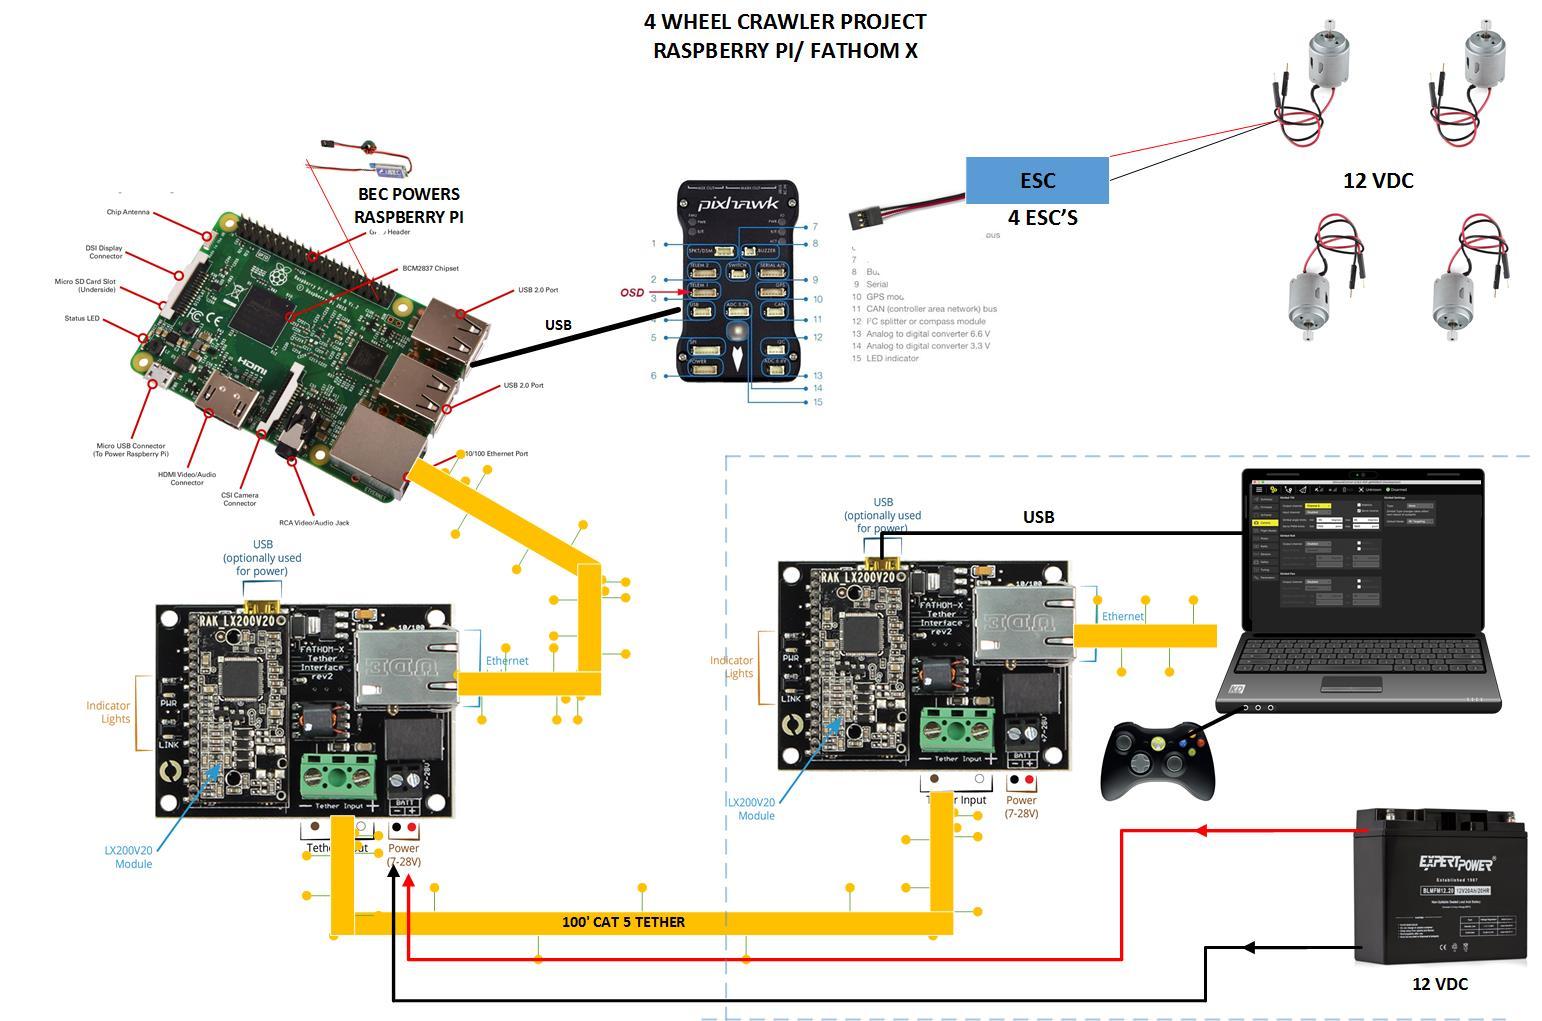 Anyone use Blue Robotics Fathom X/Raspberry PI Tethered on ... power cable cat 5 wires diagram 